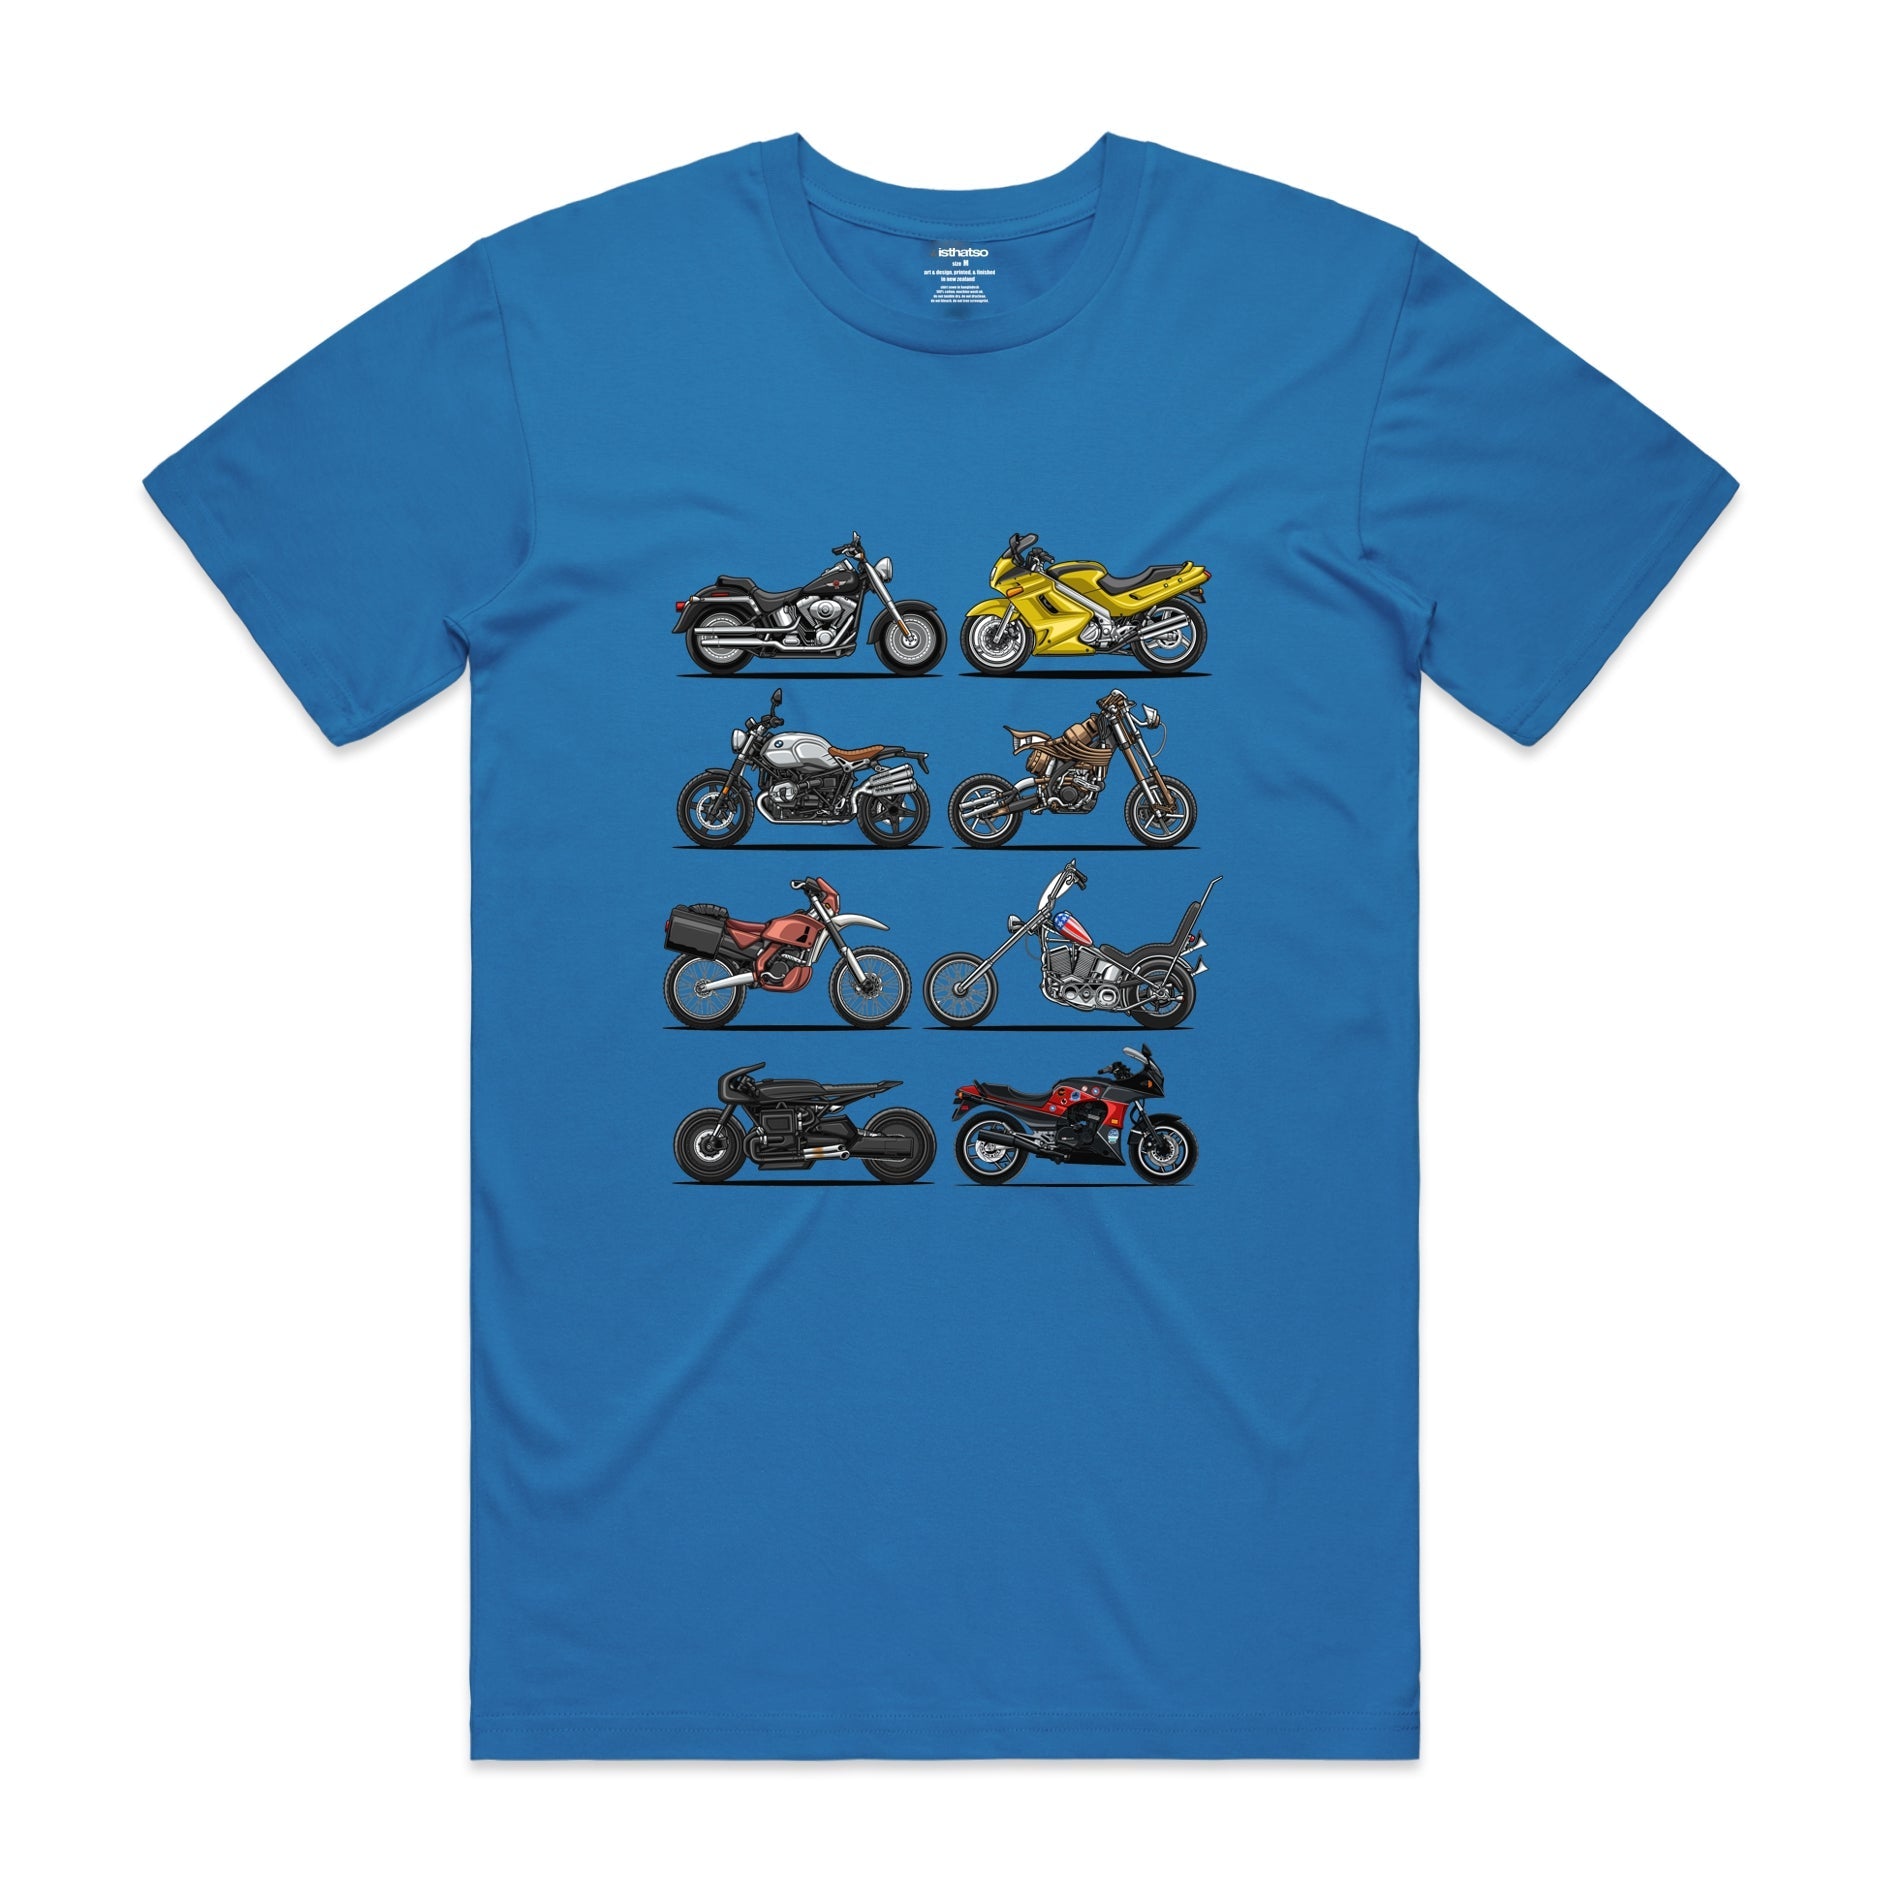 Isthatso - Movie Motorcycles SS Tee - Bright Blue